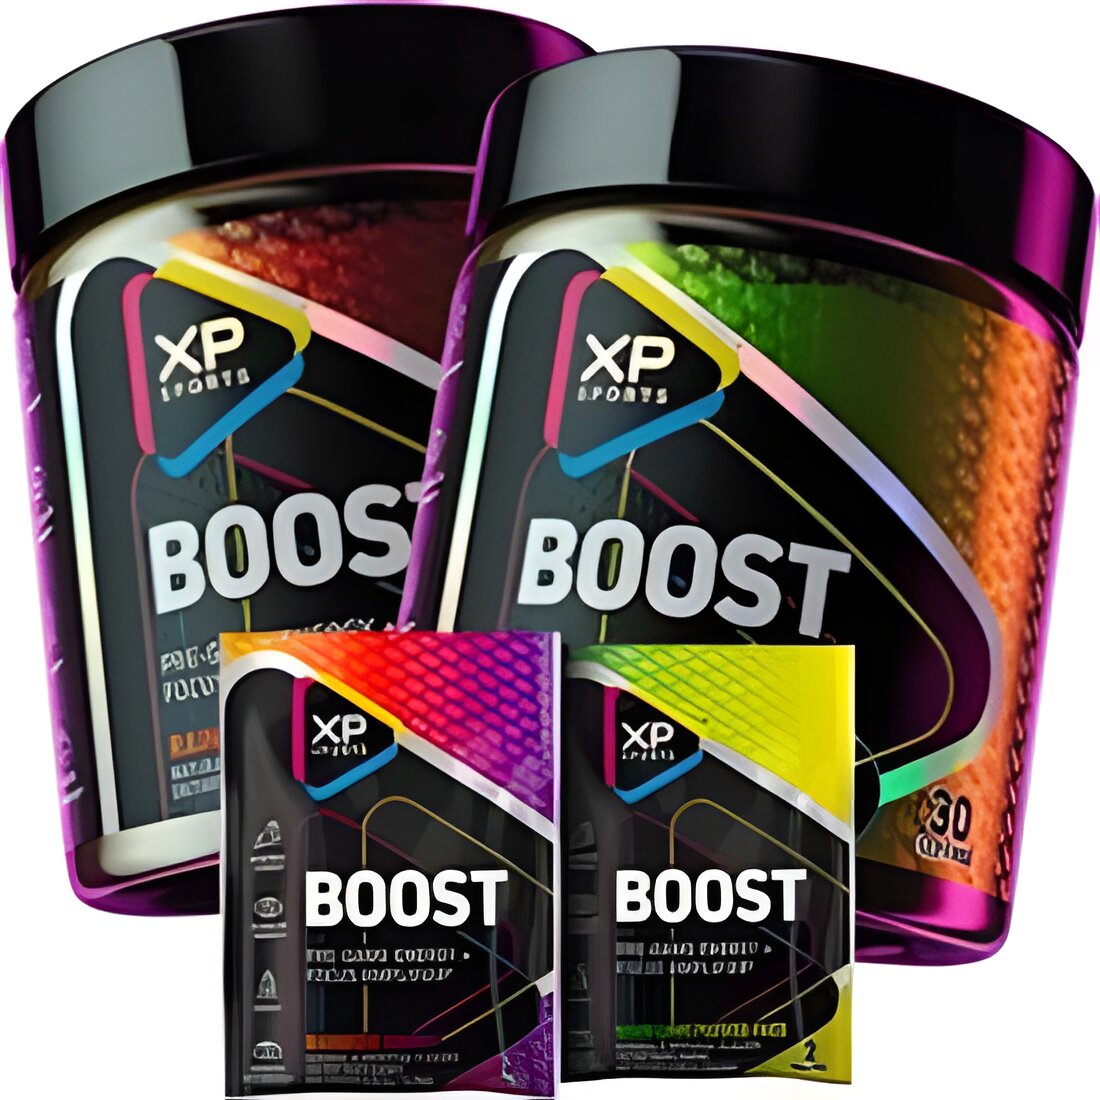 Free XP Sports Boost Pre-Game Energy Samples